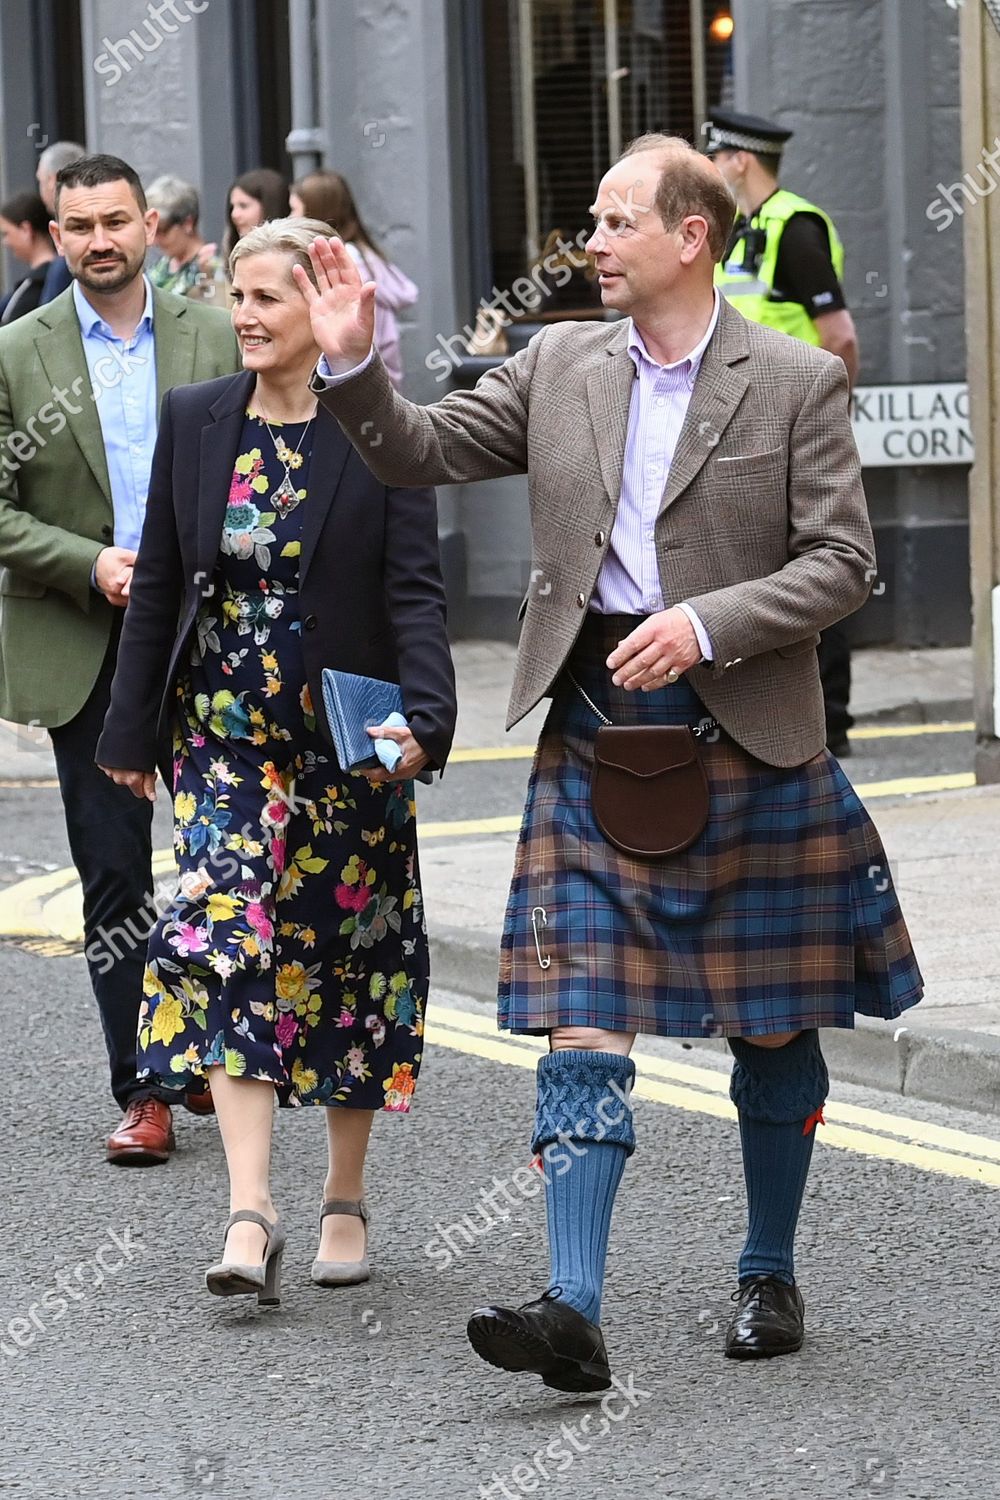 prince-edward-and-sophie-countess-of-wessex-visit-to-s-mart-angus-forfar-scotland-uk-shutterstock-editorial-12172314x.jpg